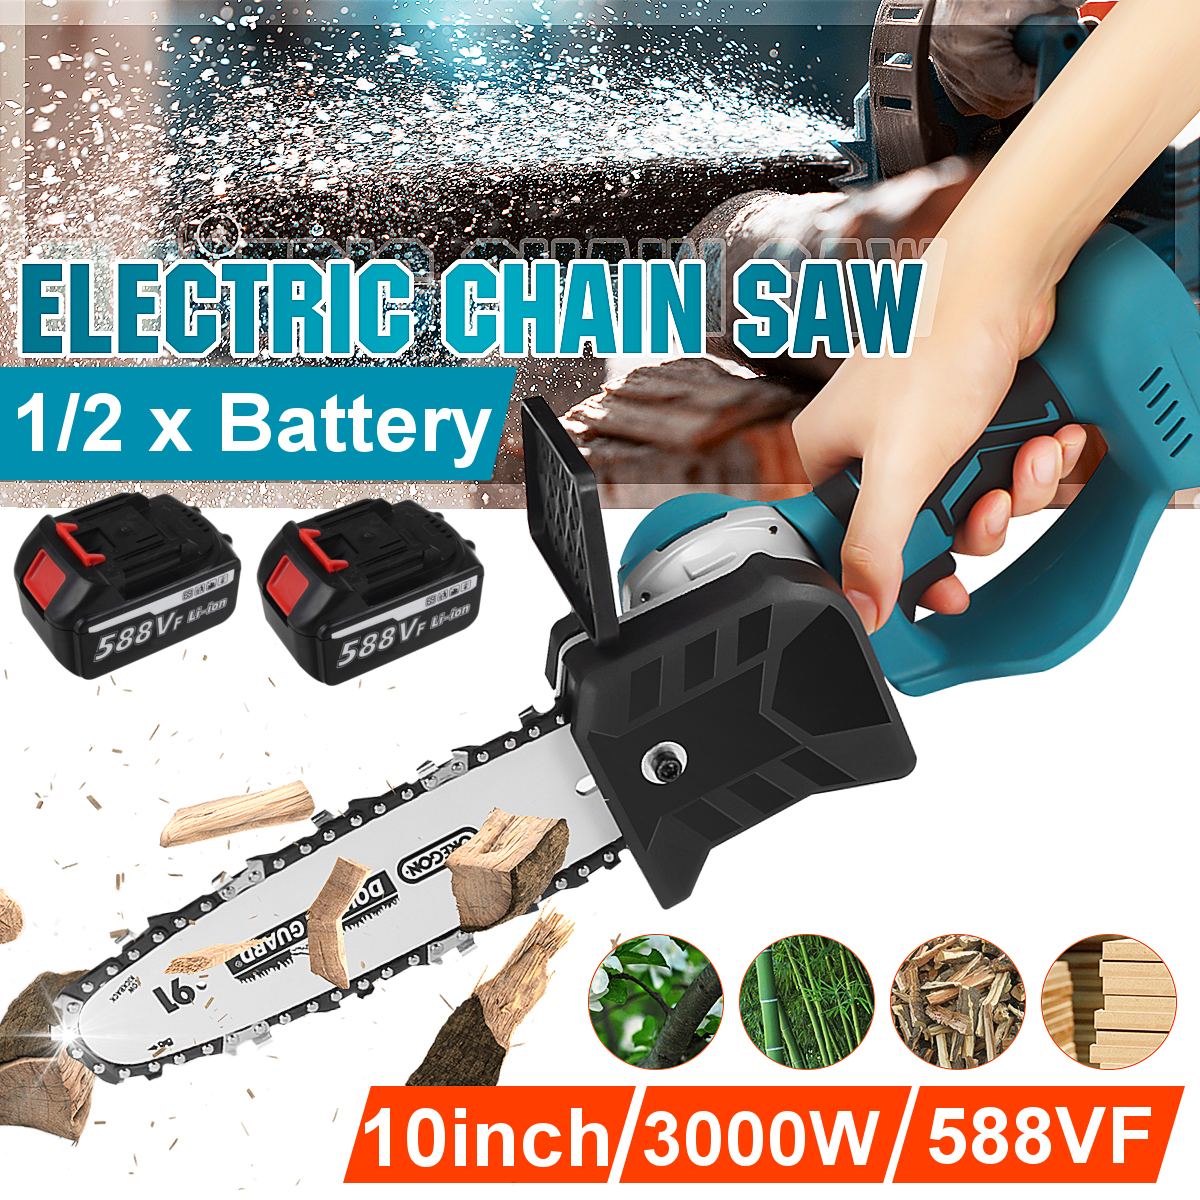 10-Inch-588VF-Electric-Chain-Saw-Woodworking-Tool-Portable-Chainsaws-w-1pc2pcs-Battery-For-Cutting-P-1823938-2